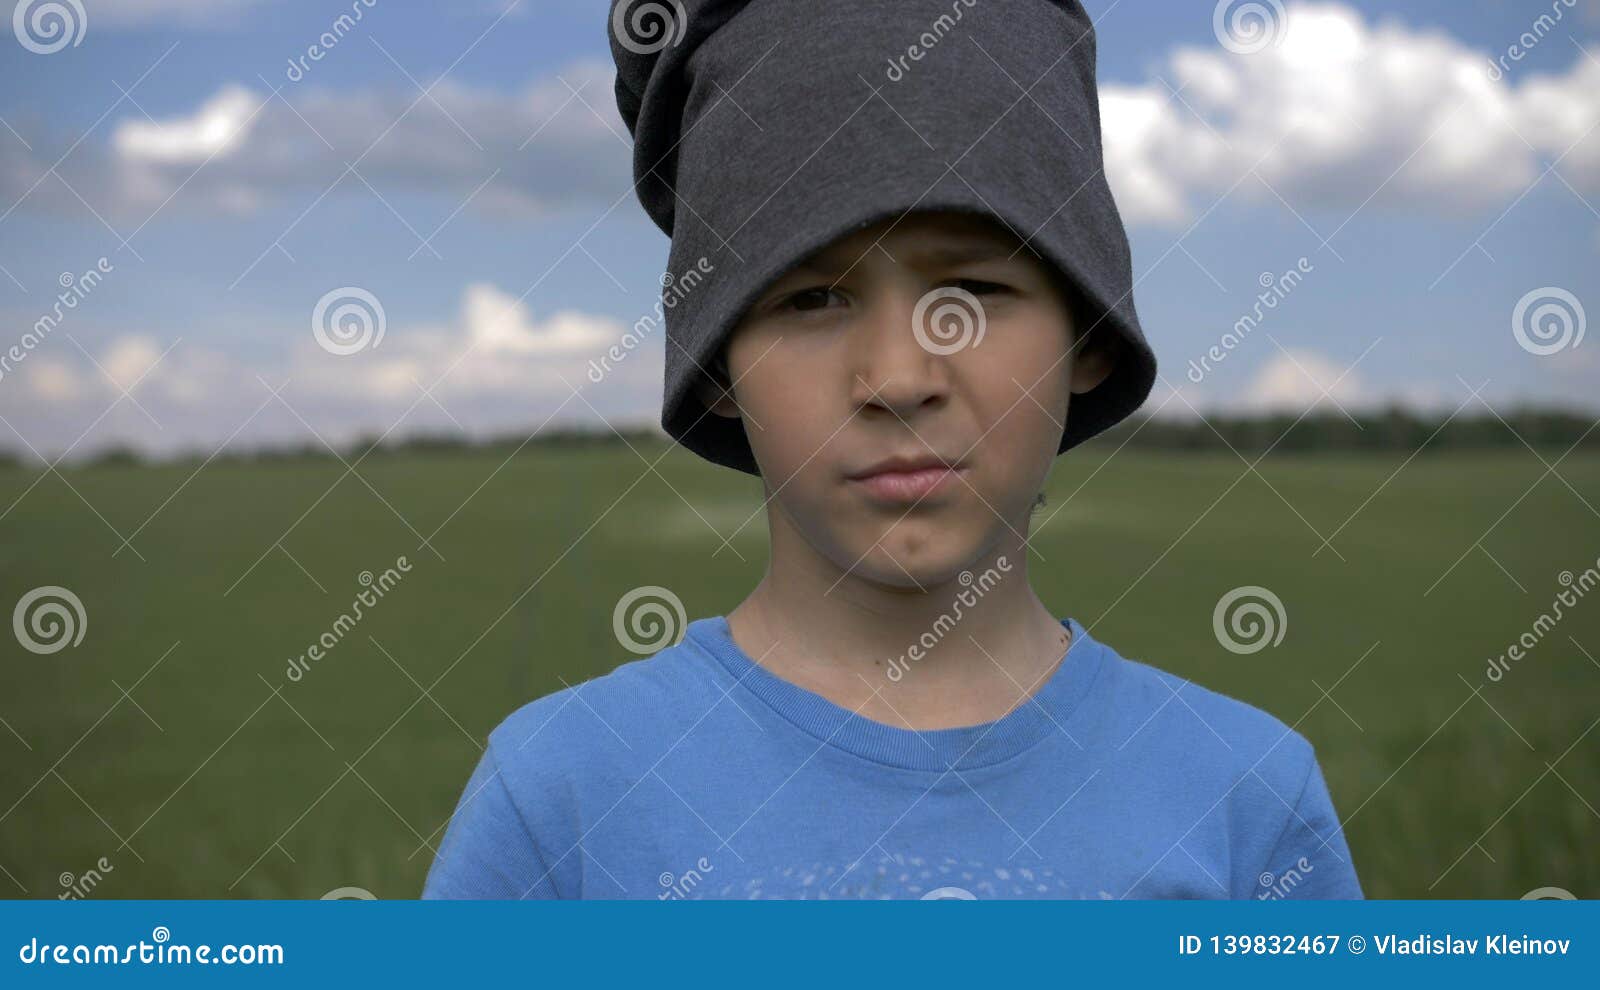 Portrait of a Farmer Boy Looking at the Camera Stock Image - Image of ...